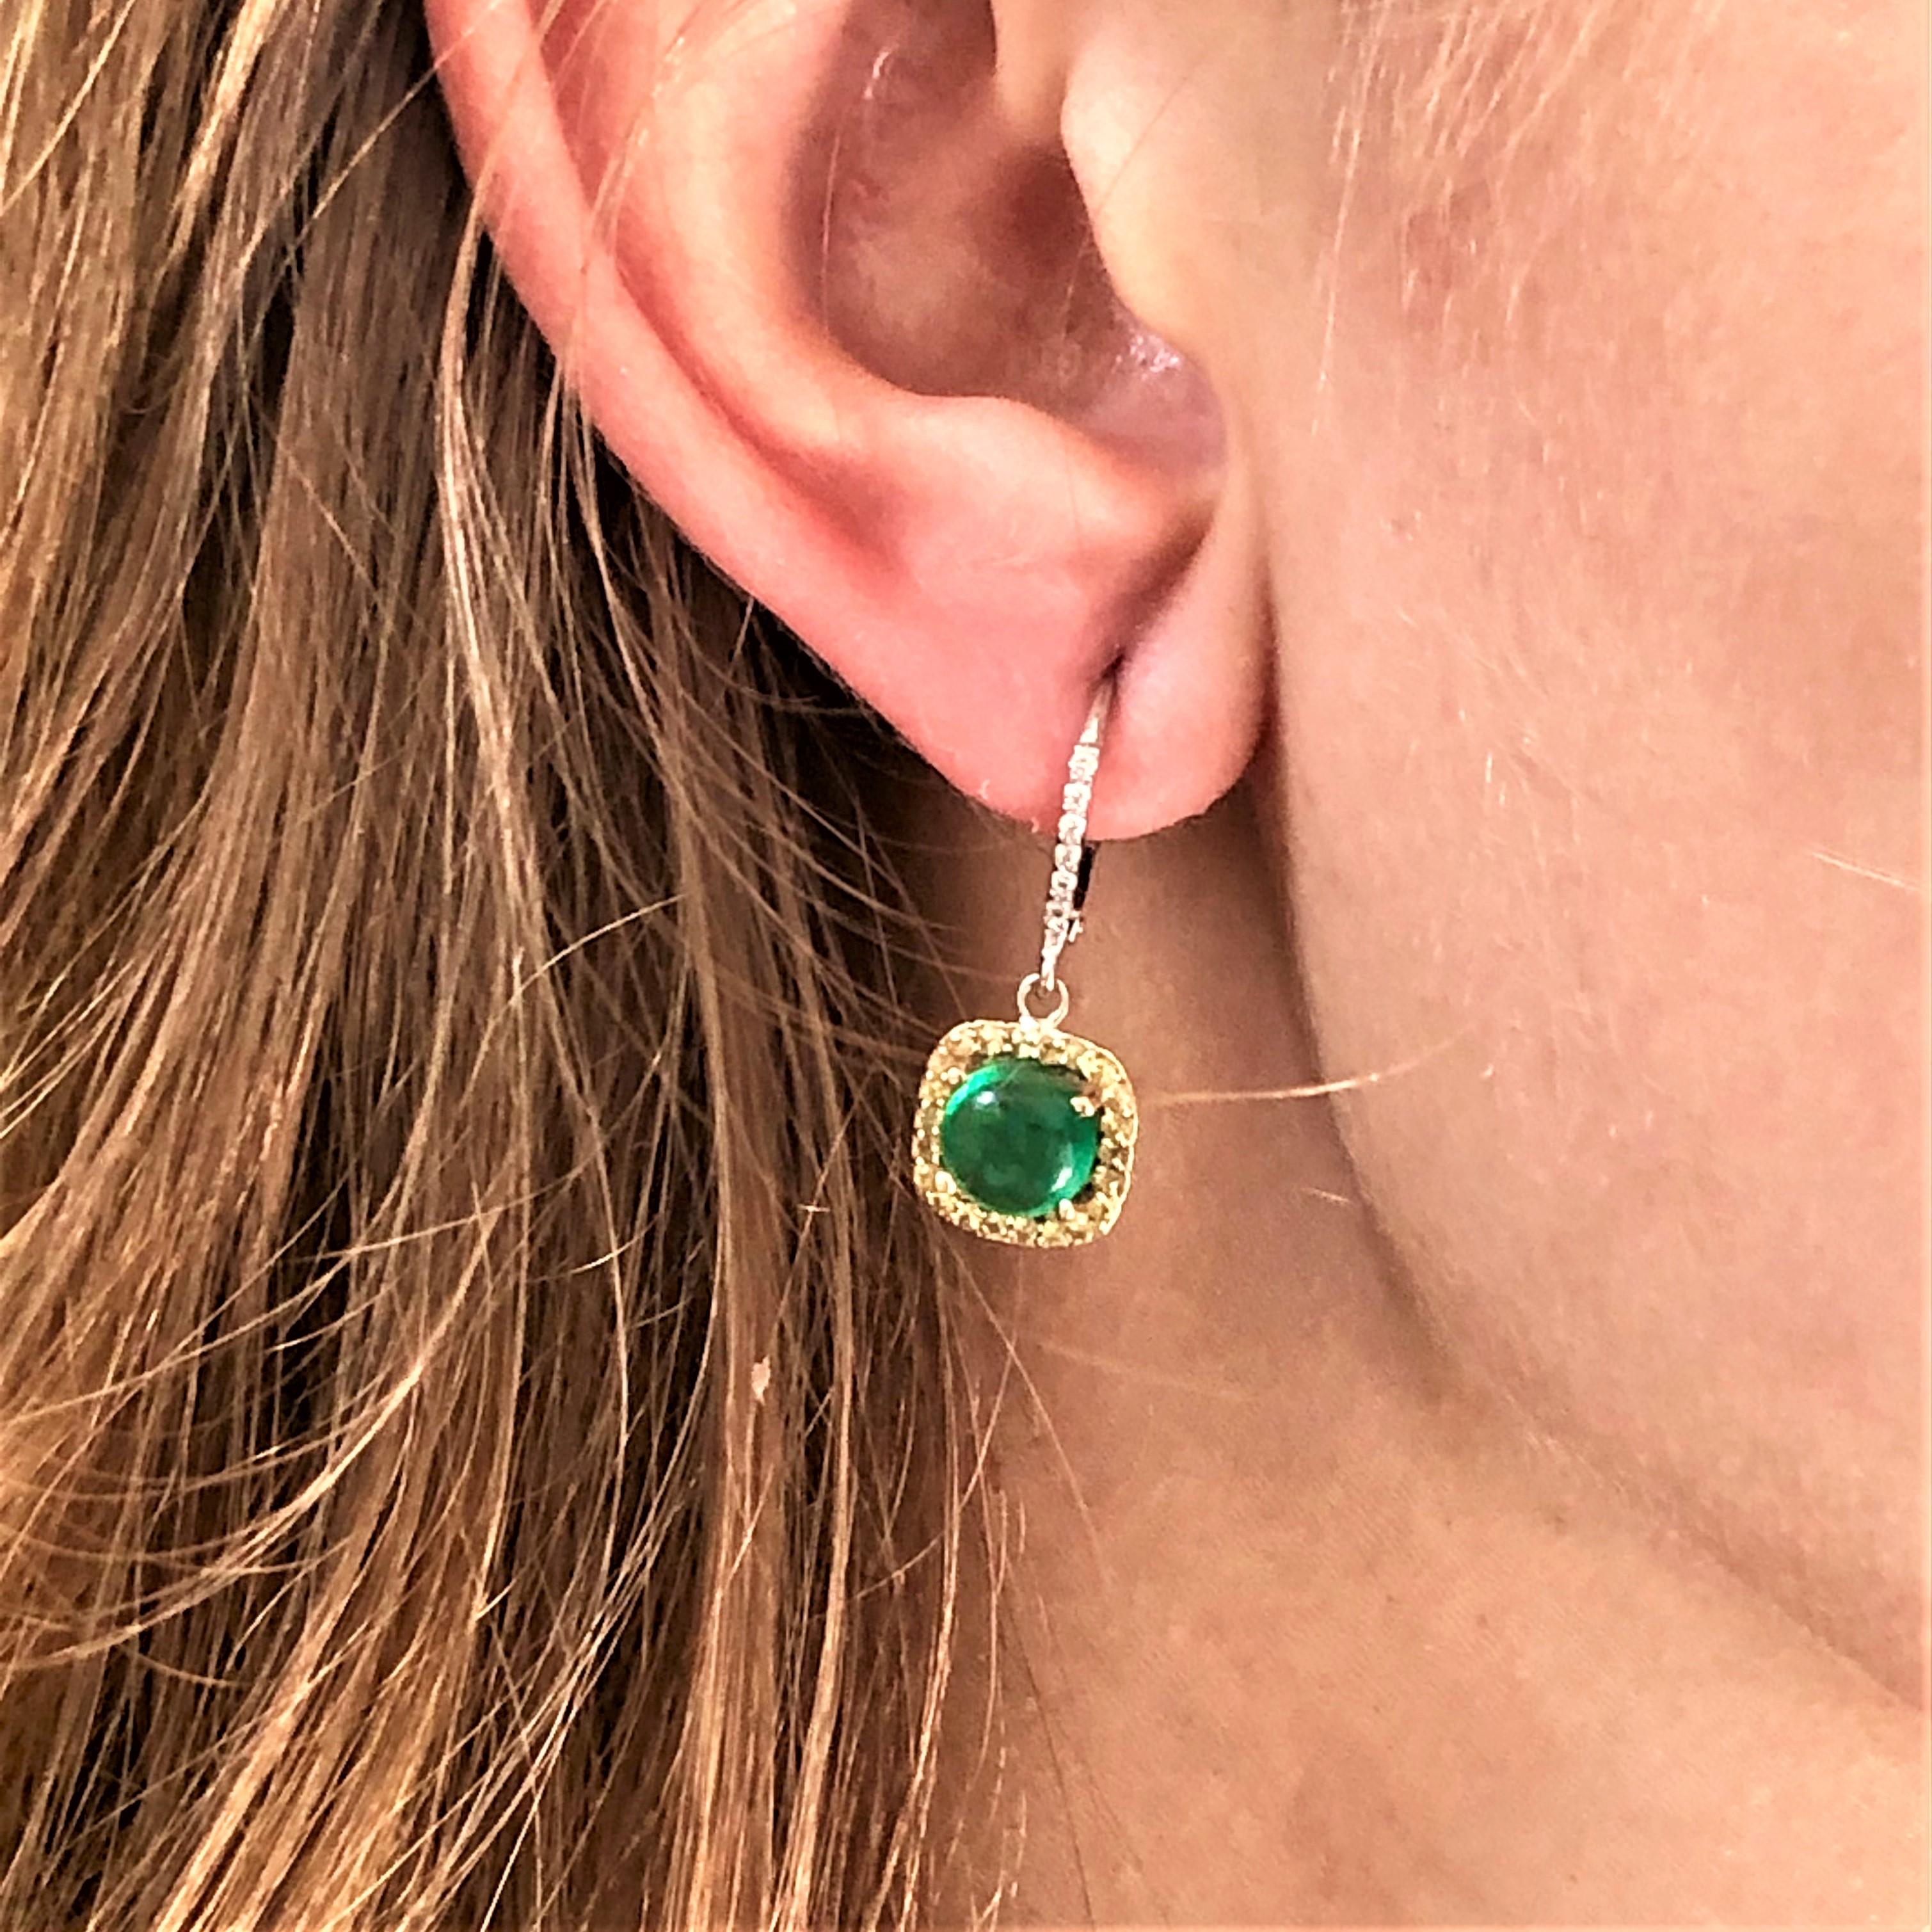 Fourteen karat white gold drop hoop earrings with cabochon emerald, yellow sapphire and diamonds
Round shape cabochon emerald weighing 3.40 carat 
Diamond weighing 0.20 carat 
Yellow Sapphire weighing 0.35 carat 
Earrings measuring 1.5 inch long